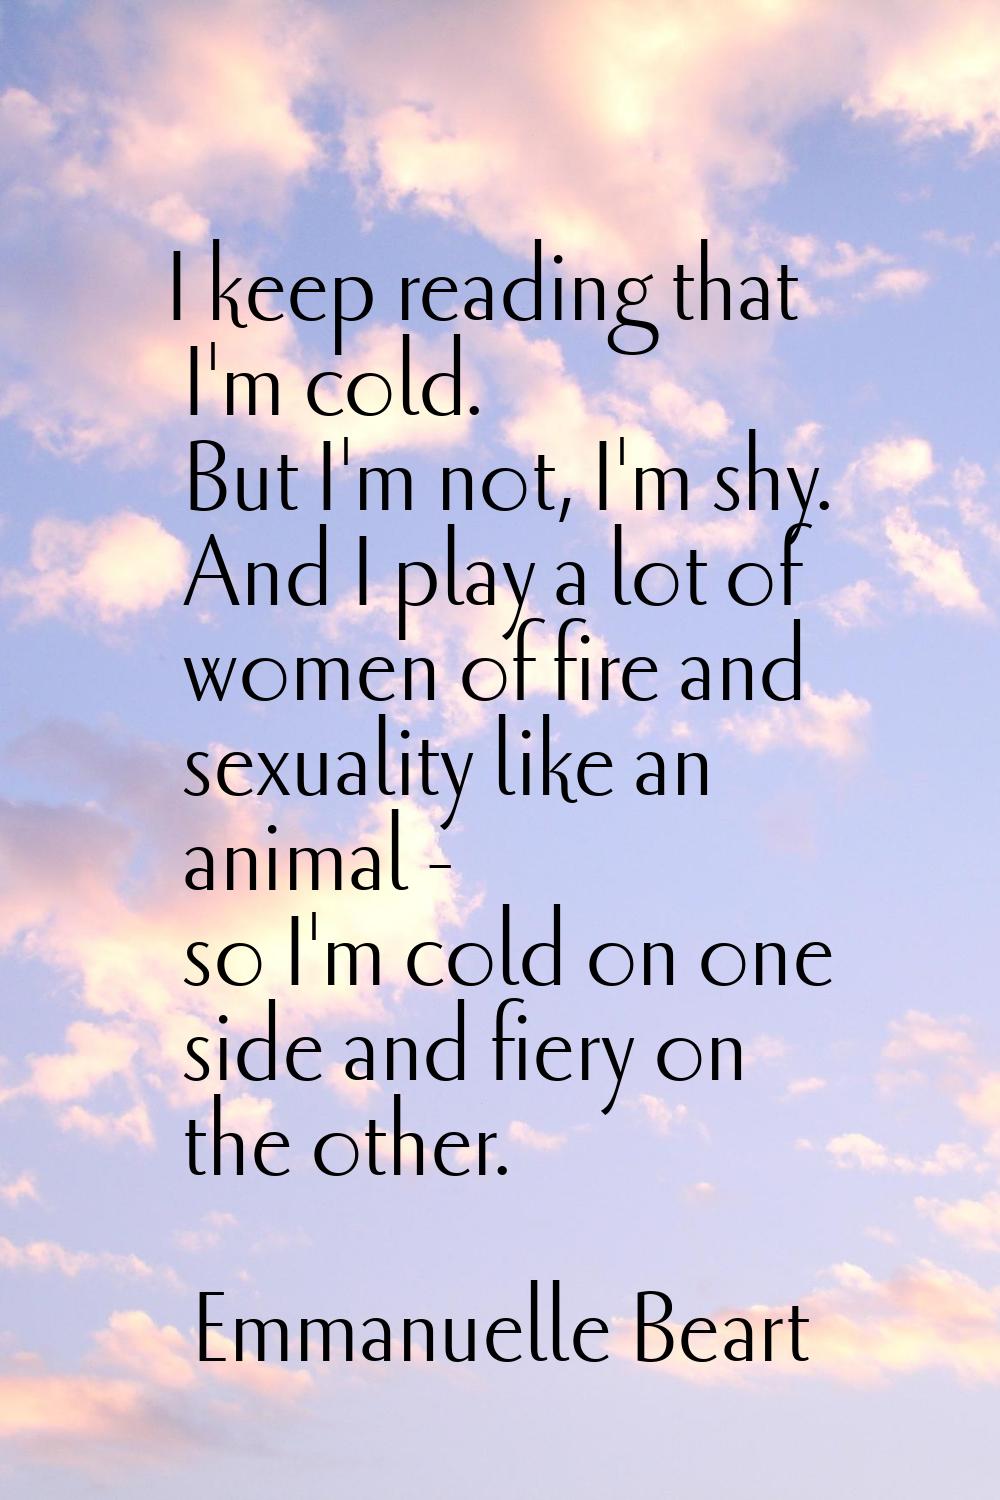 I keep reading that I'm cold. But I'm not, I'm shy. And I play a lot of women of fire and sexuality